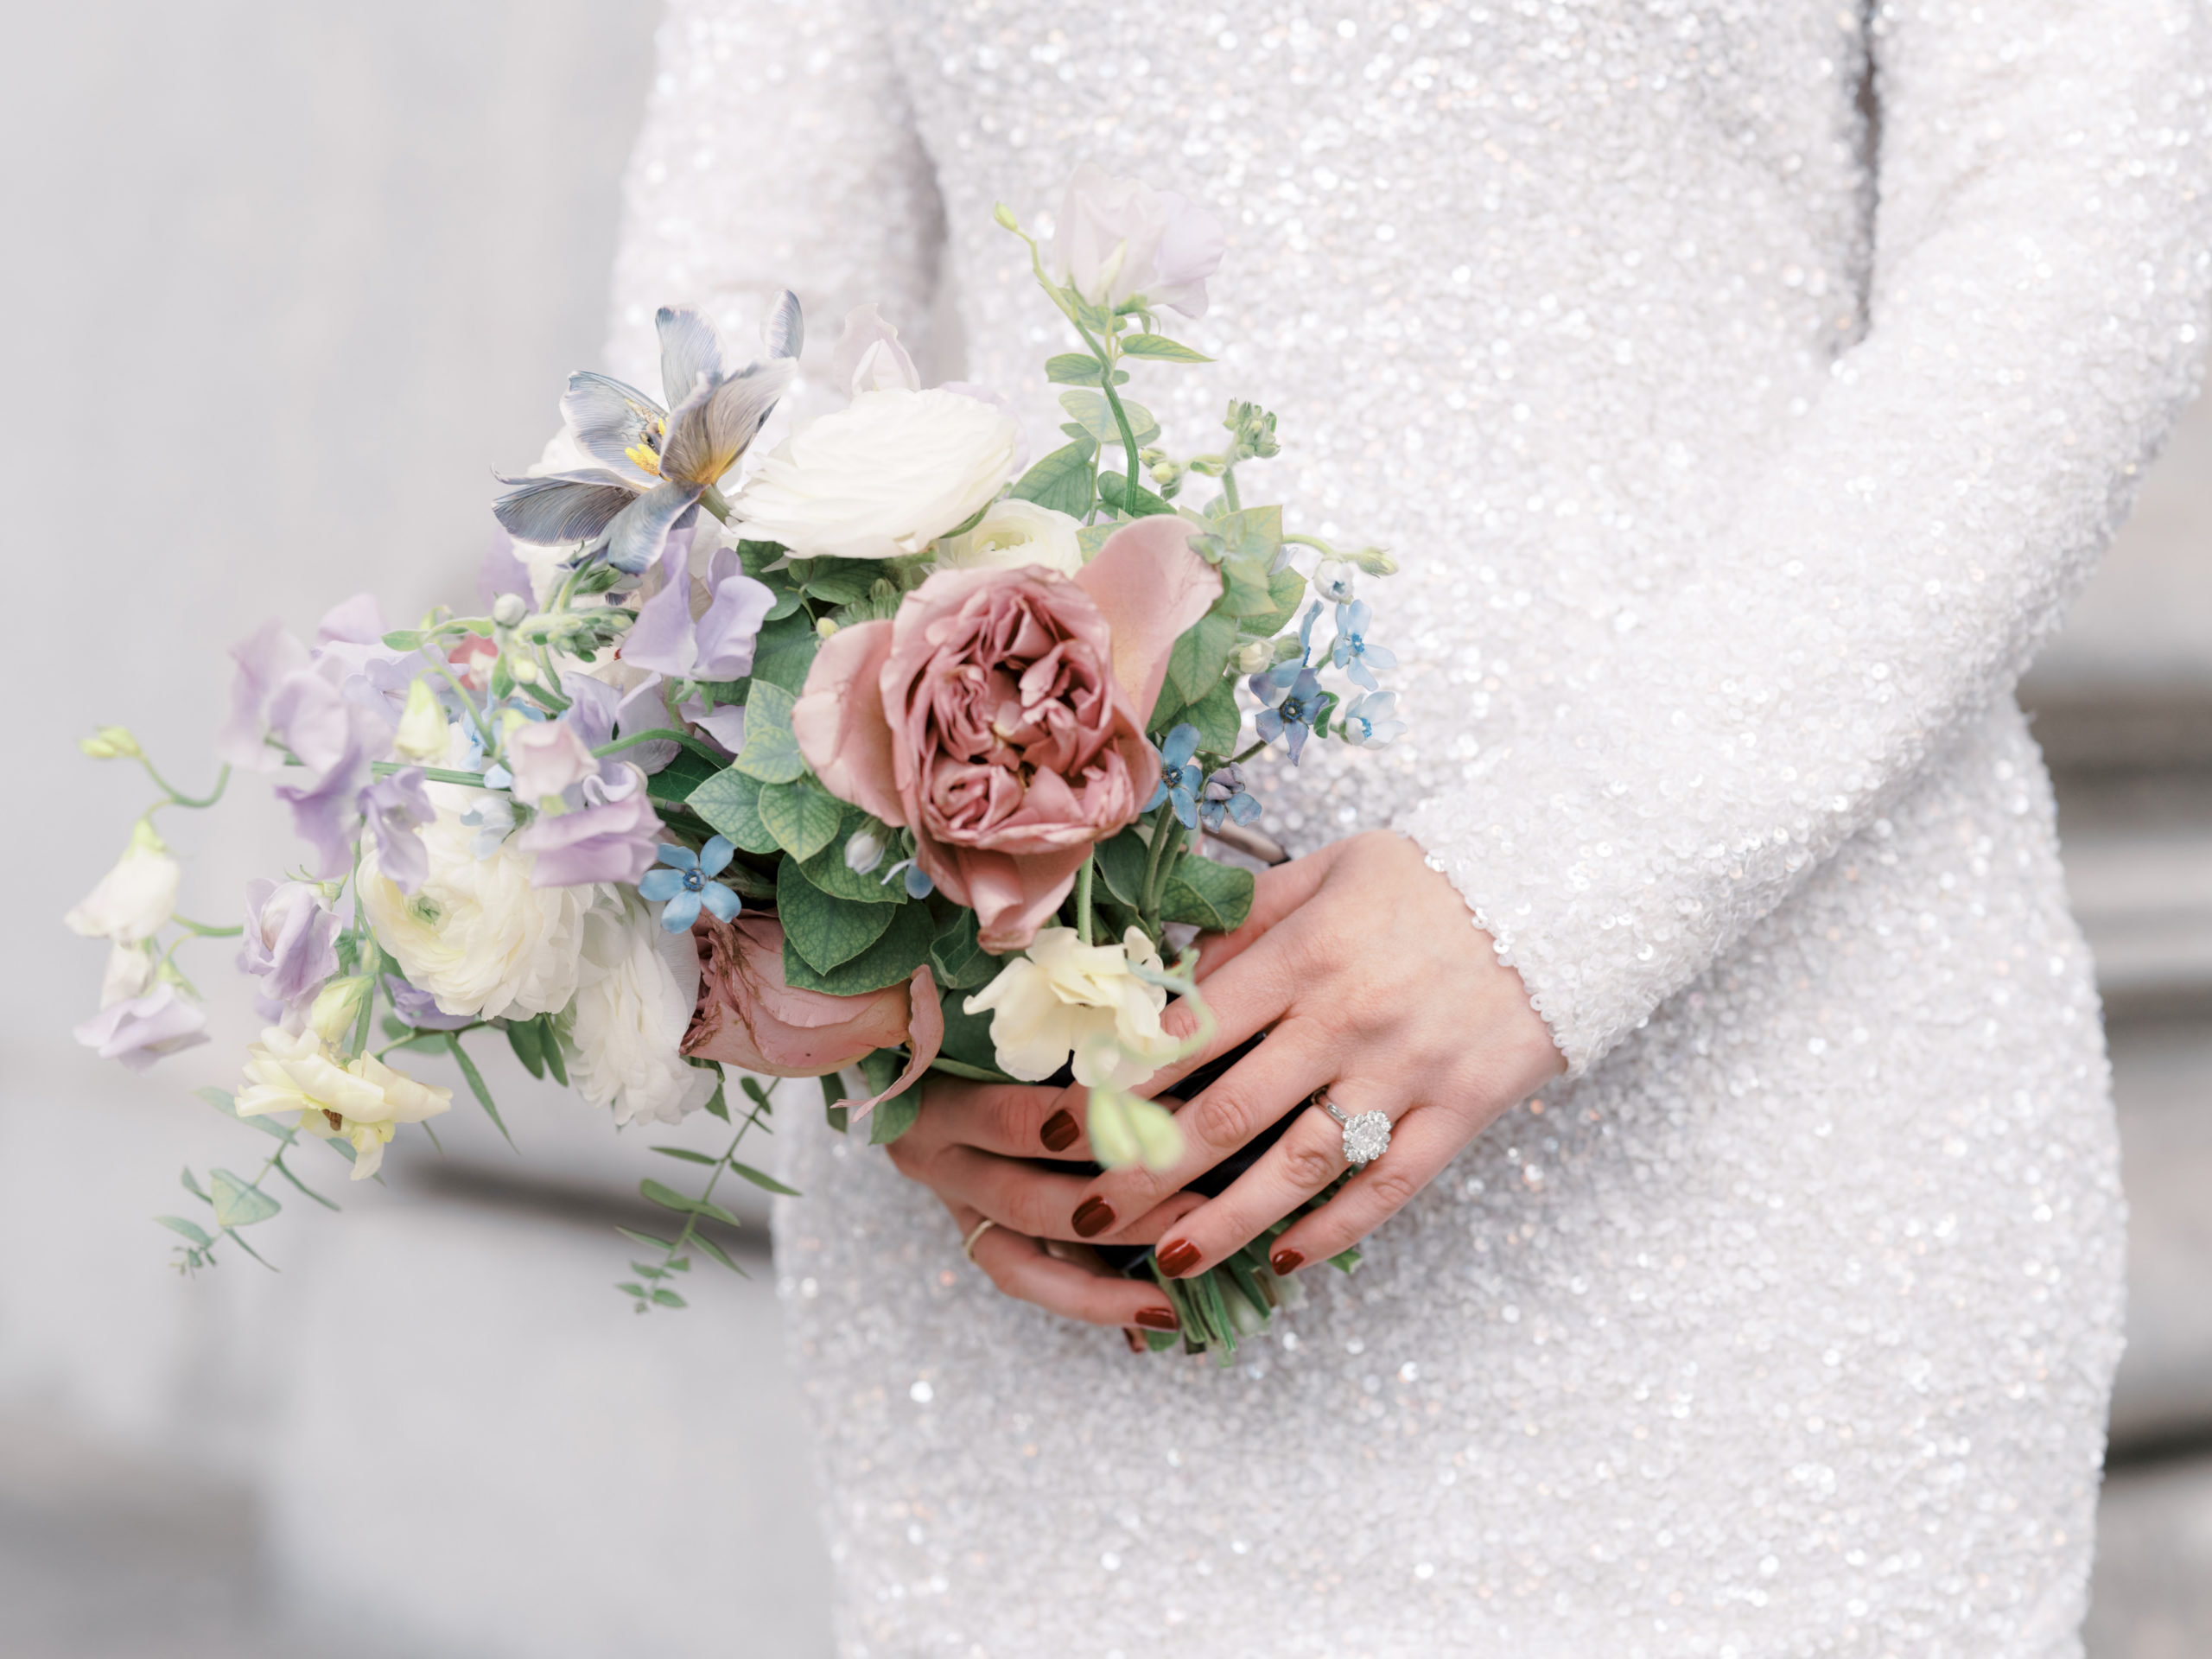 Beautiful flower bouquet in the bride's hands for her city hall elopement. Editorial wedding image by Jenny Fu Studio NYC